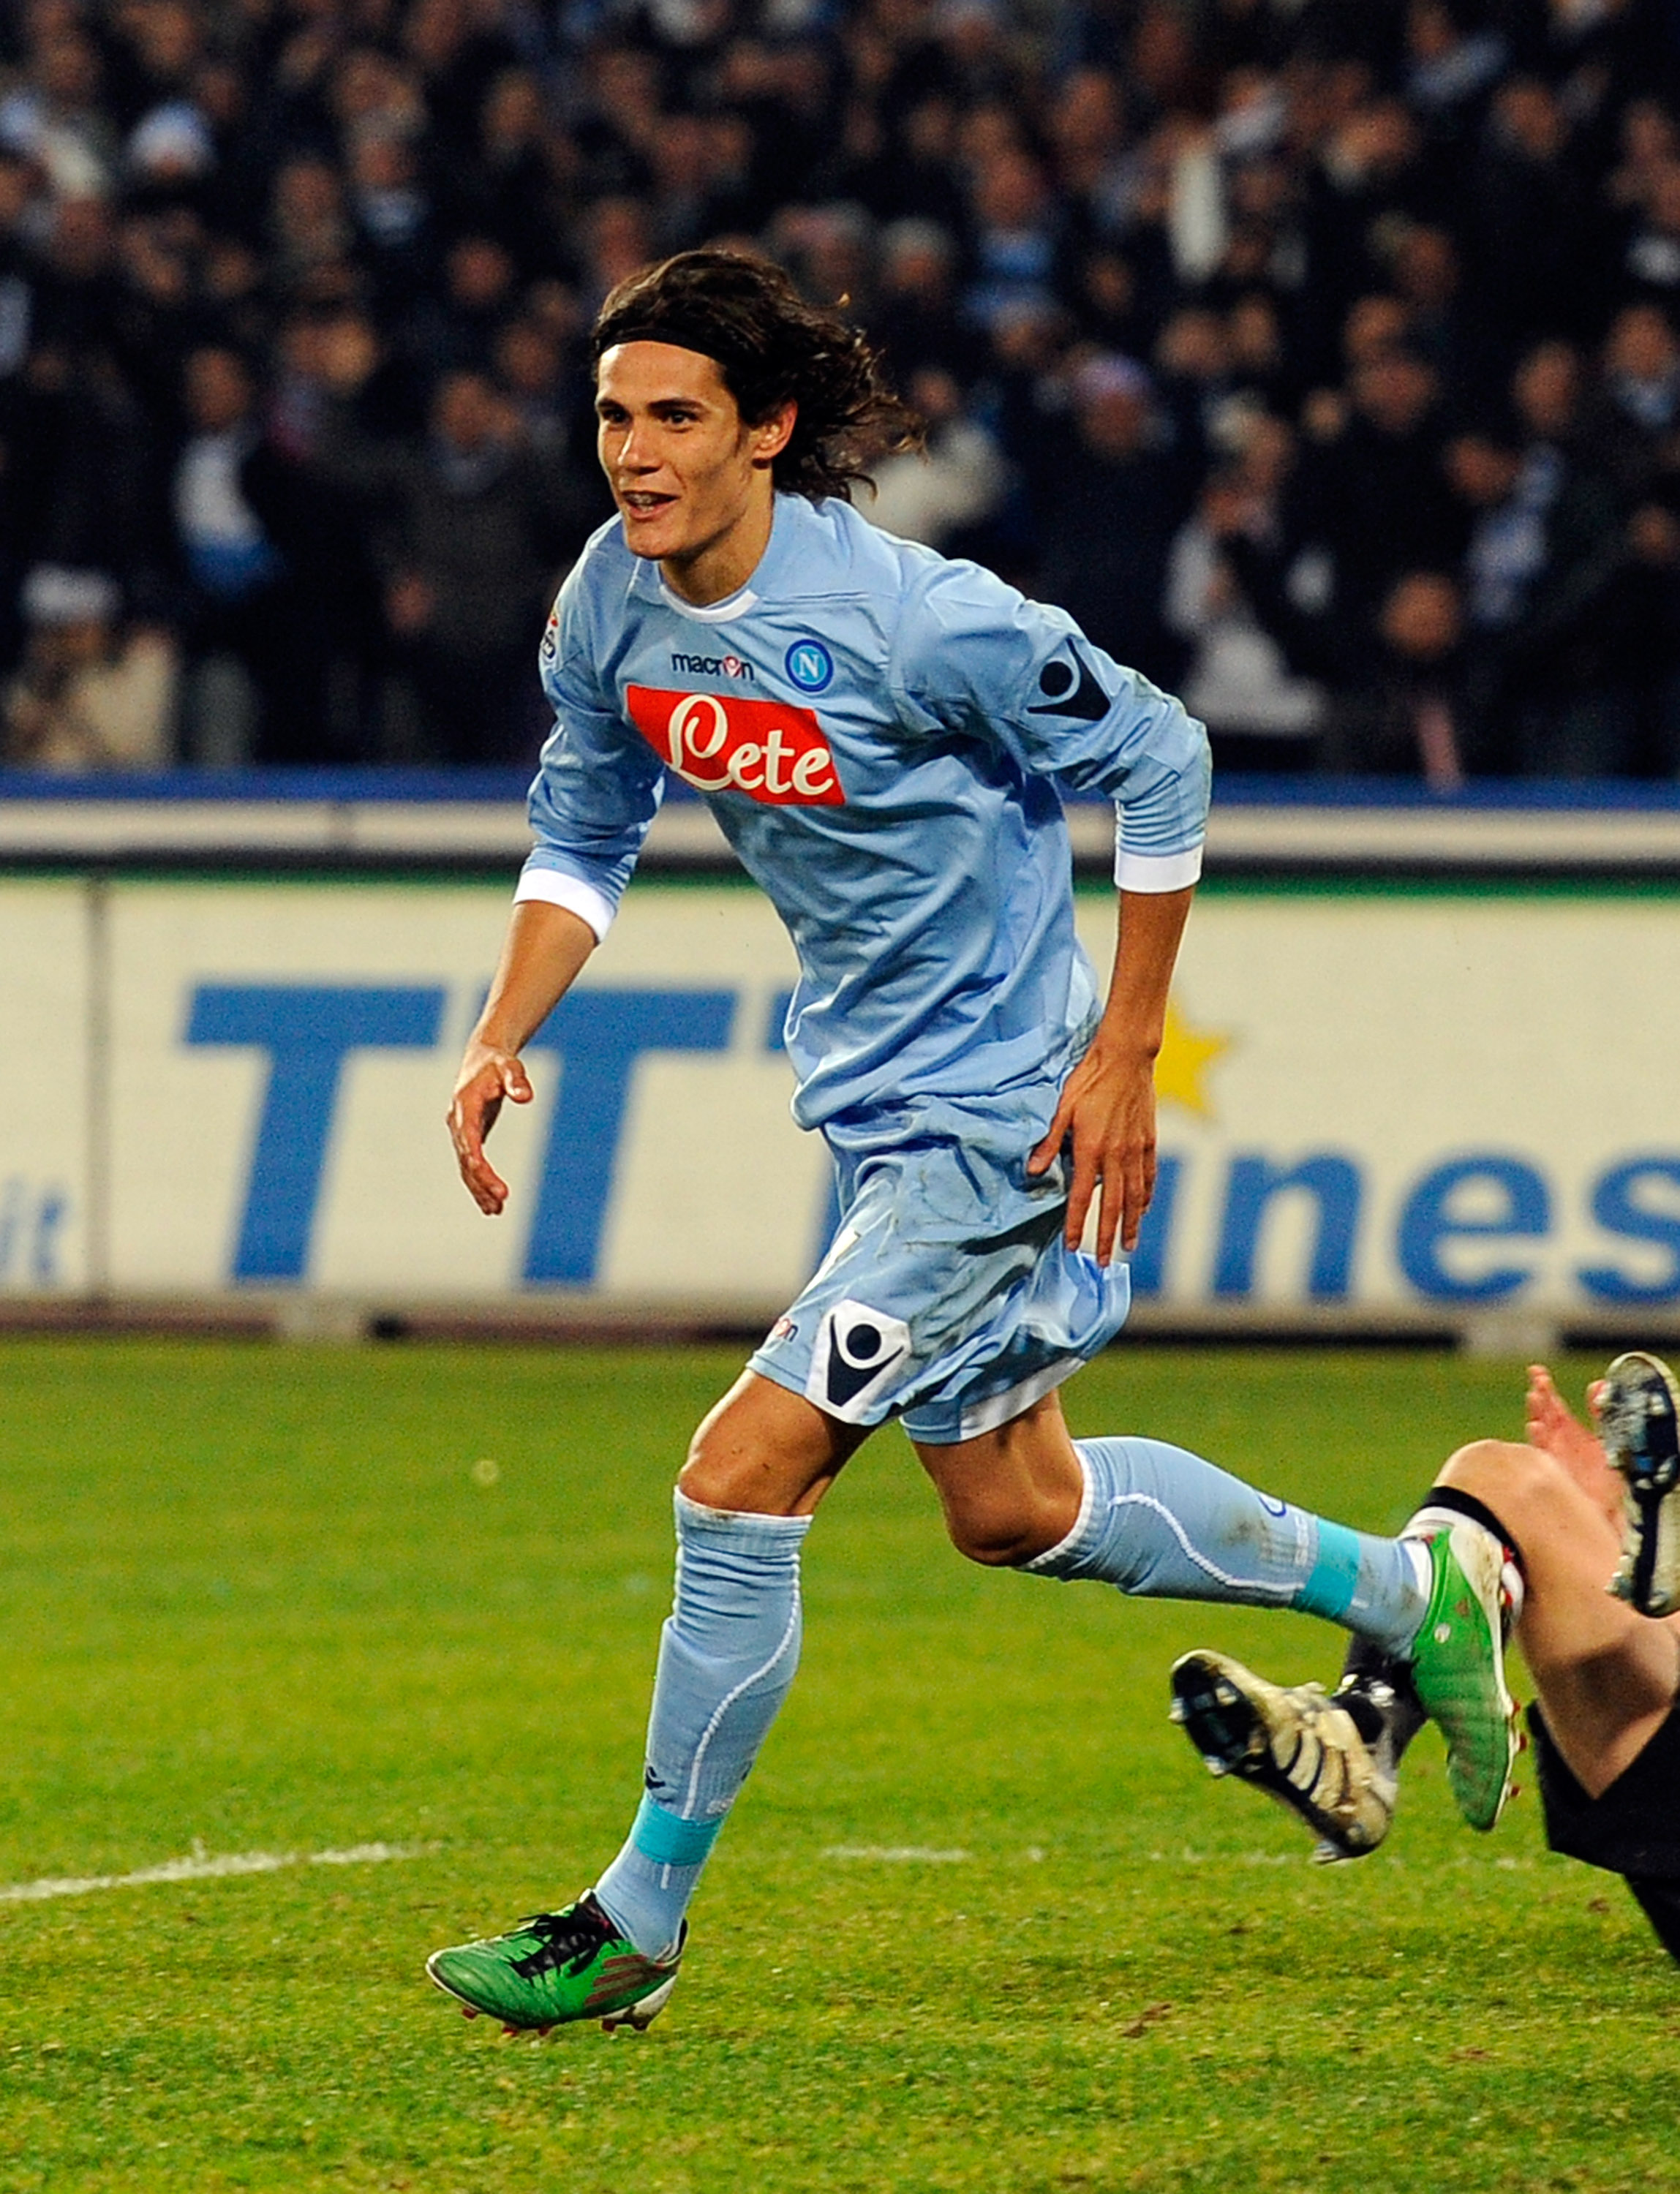 NAPLES, ITALY - JANUARY 09:  Edinson Cavani of SSC Napoli celebrates scoring the third goal during the Serie A match between SSC Napoli and Juventus FC at Stadio San Paolo on January 9, 2011 in Naples, Italy.  (Photo by Claudio Villa/Getty Images)